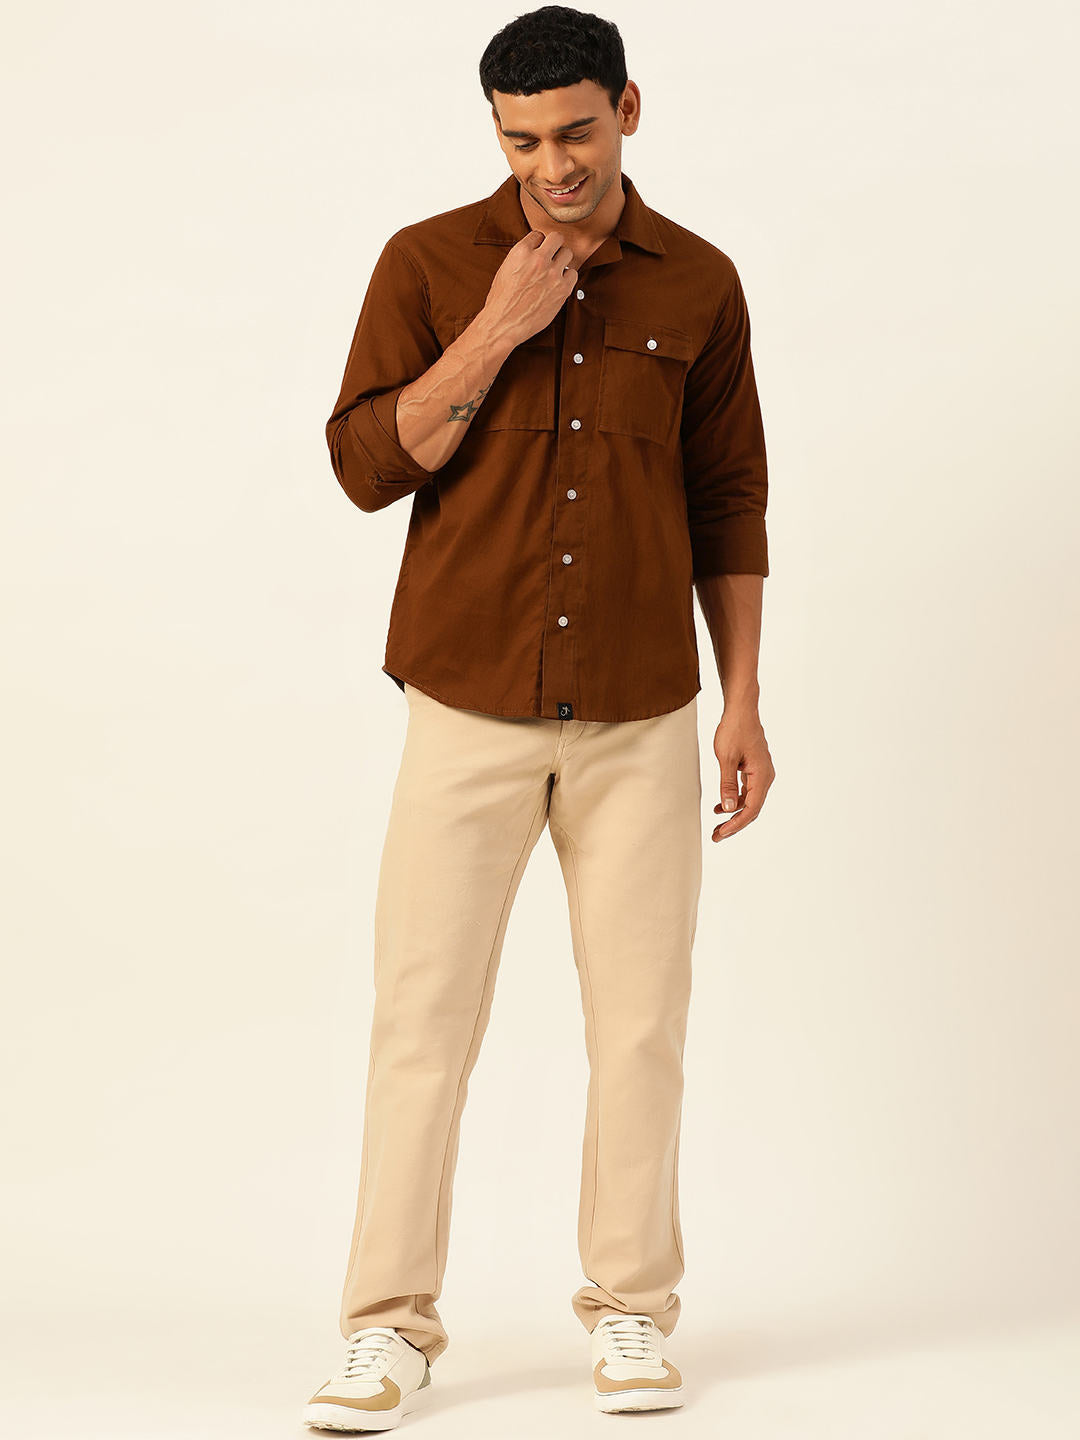 What color shirt should I wear with dark brown pants? - Quora